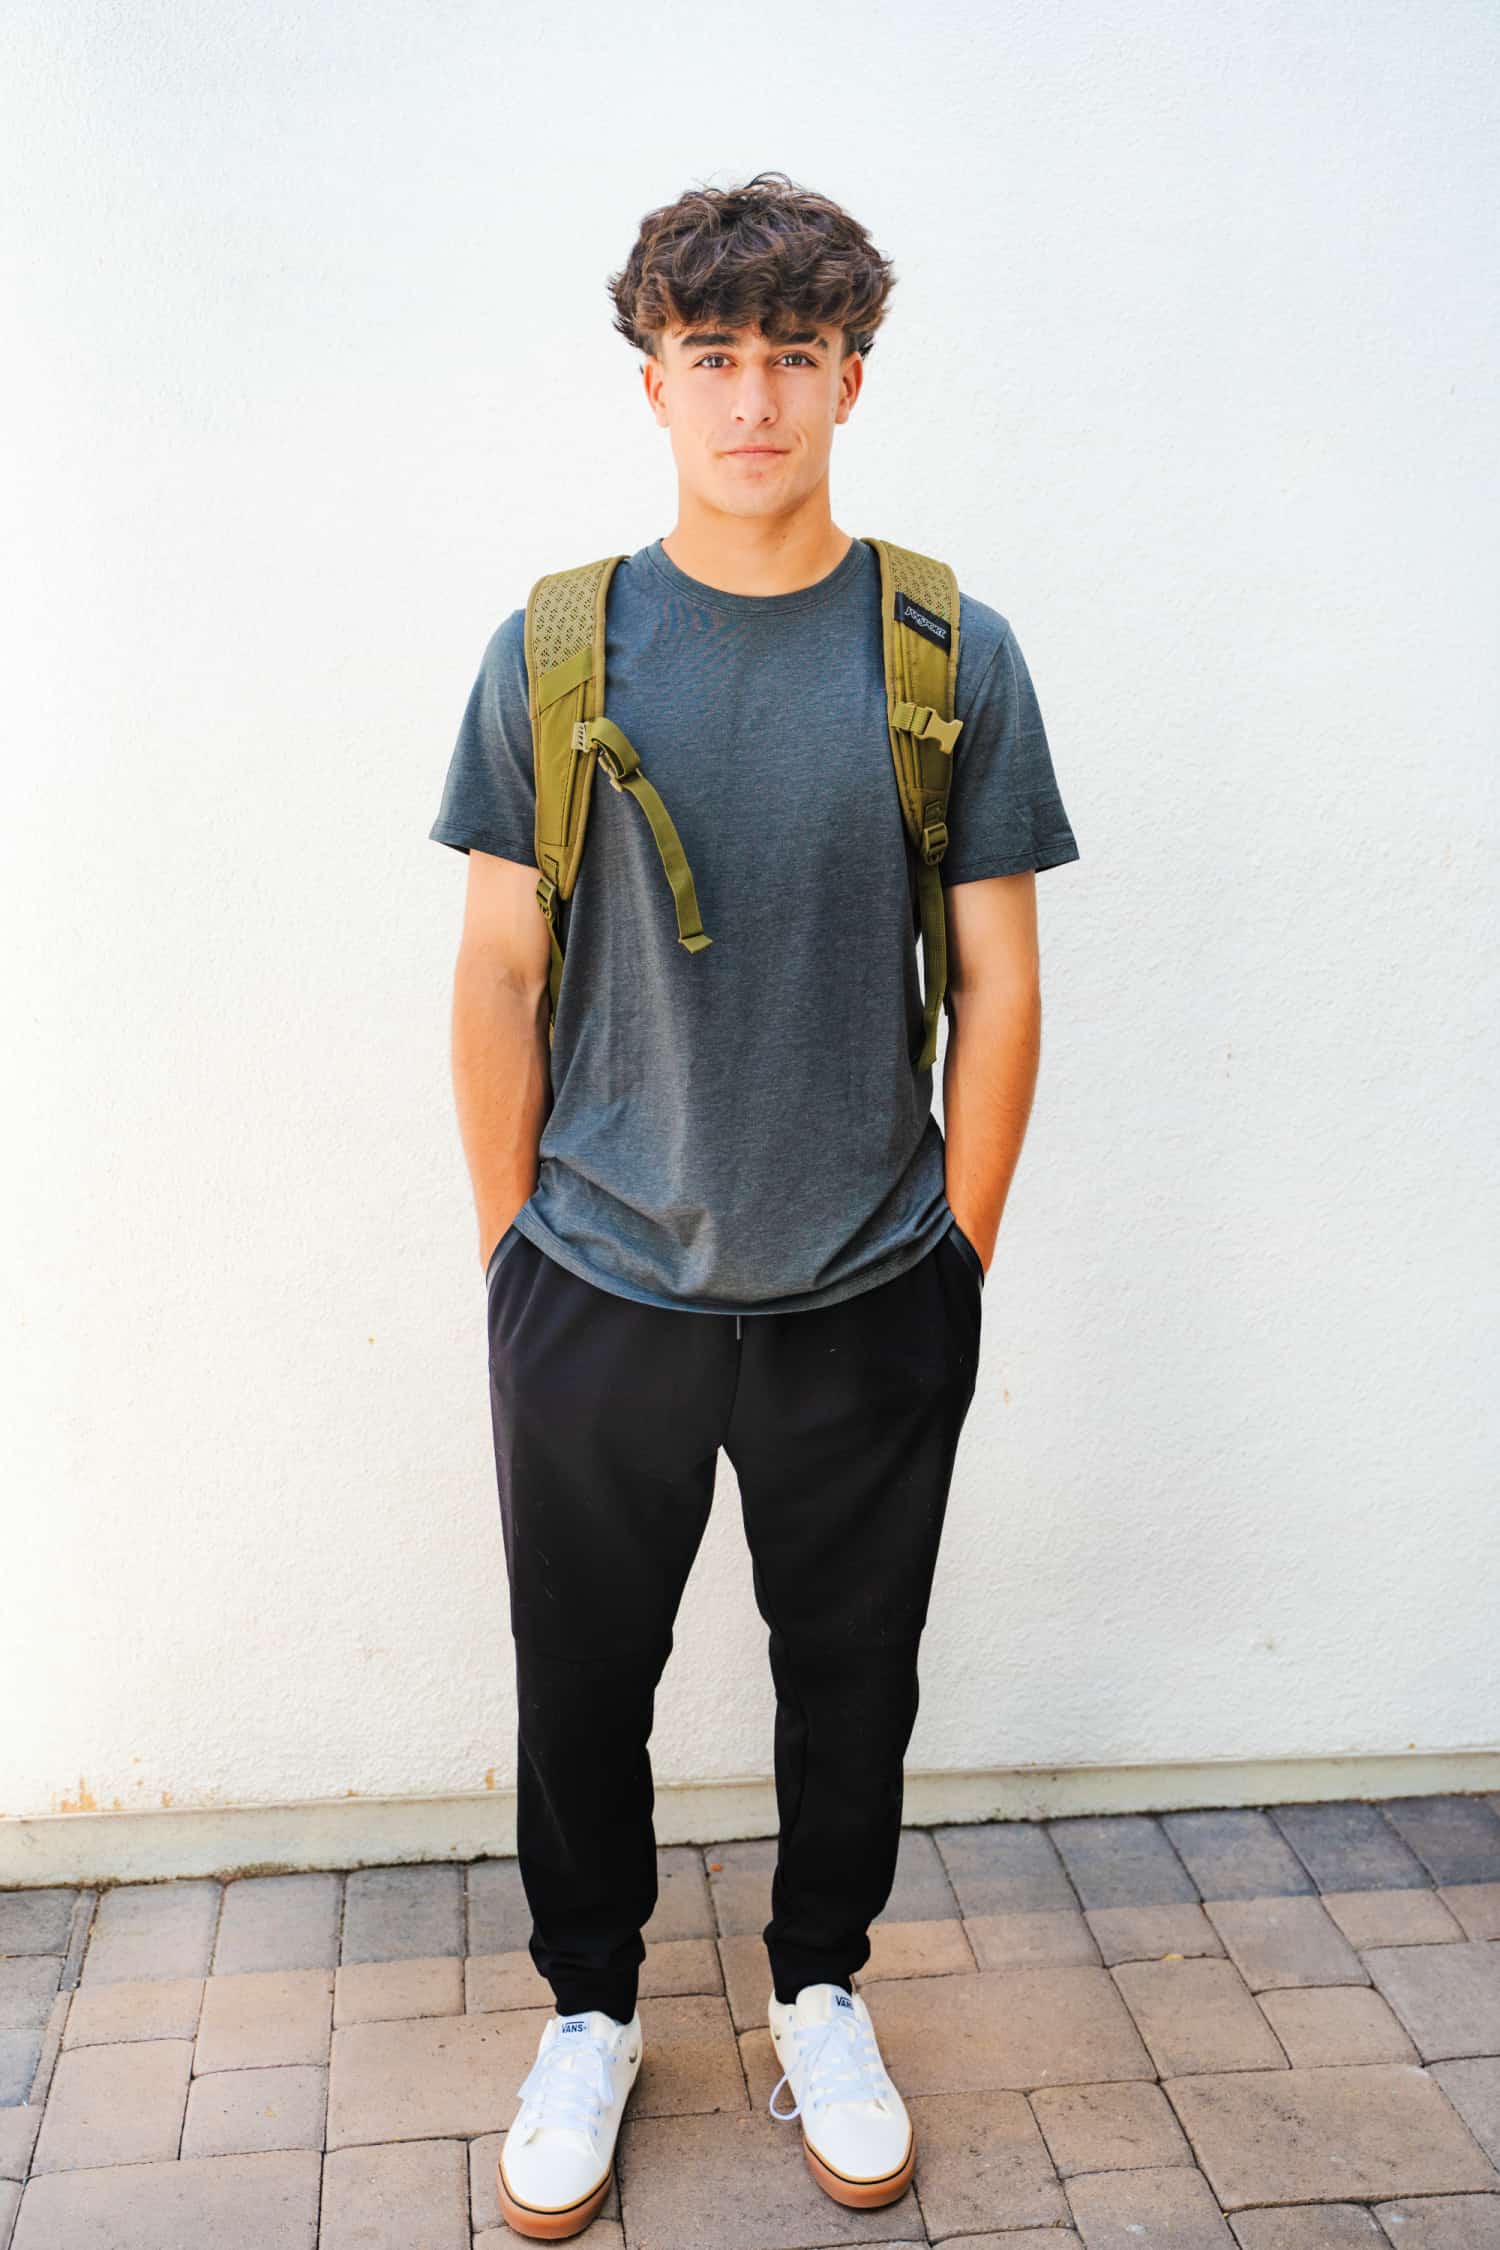 An attractive teen boy wearing back-to-school clothing from Kohl's consisting of black jogger pants, a blue t-shirt, white sneakers and a green backpack.